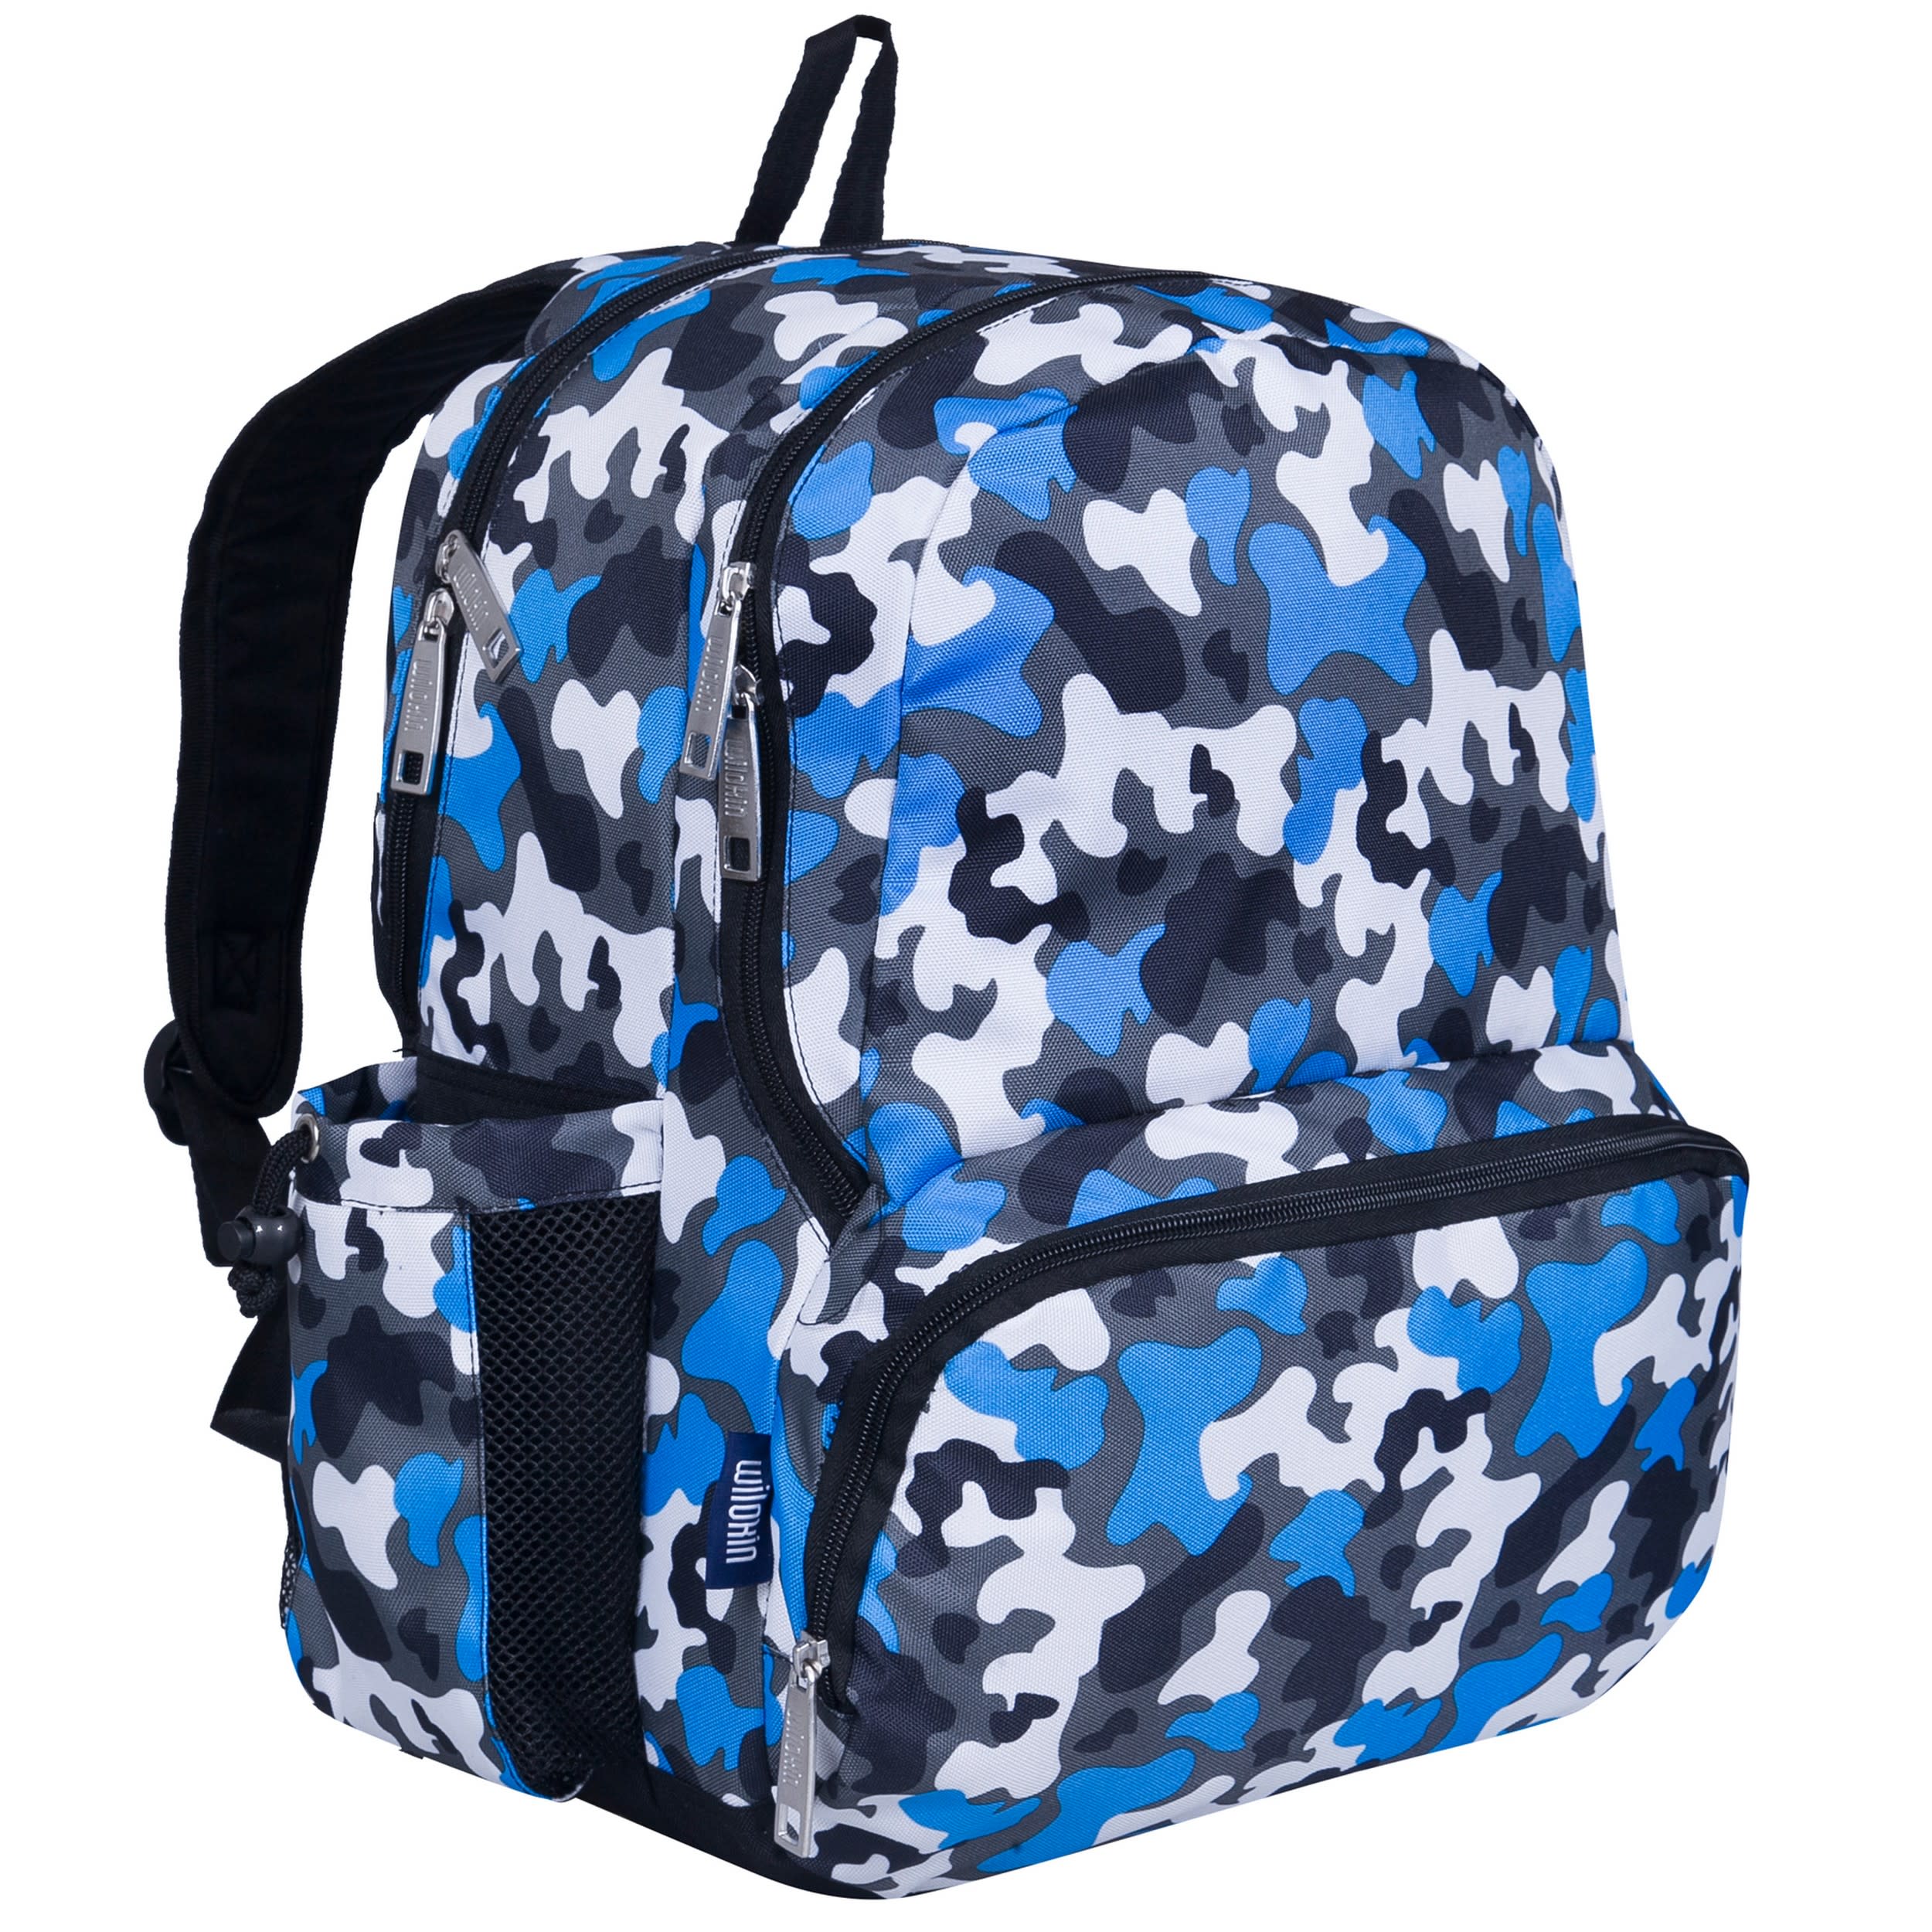 Wildkin Two Compartment Insulated Lunch Bag for Boys & Girls, Measures 9 x  8 x 7 Inches Lunch Box Ba…See more Wildkin Two Compartment Insulated Lunch